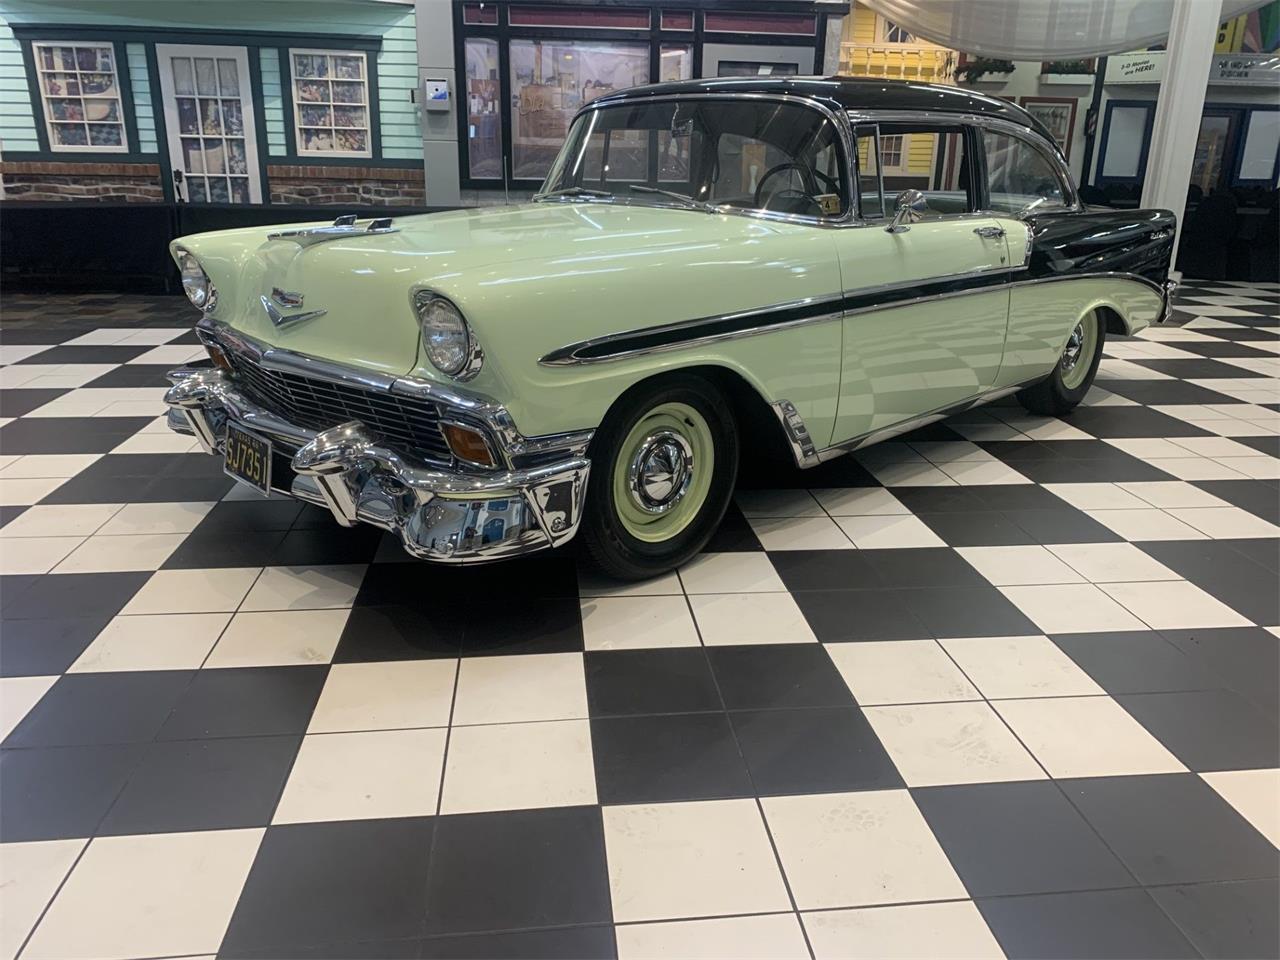 For Sale: 1956 Chevrolet Bel Air in Annandale, Minnesota for sale in Annandale, MN